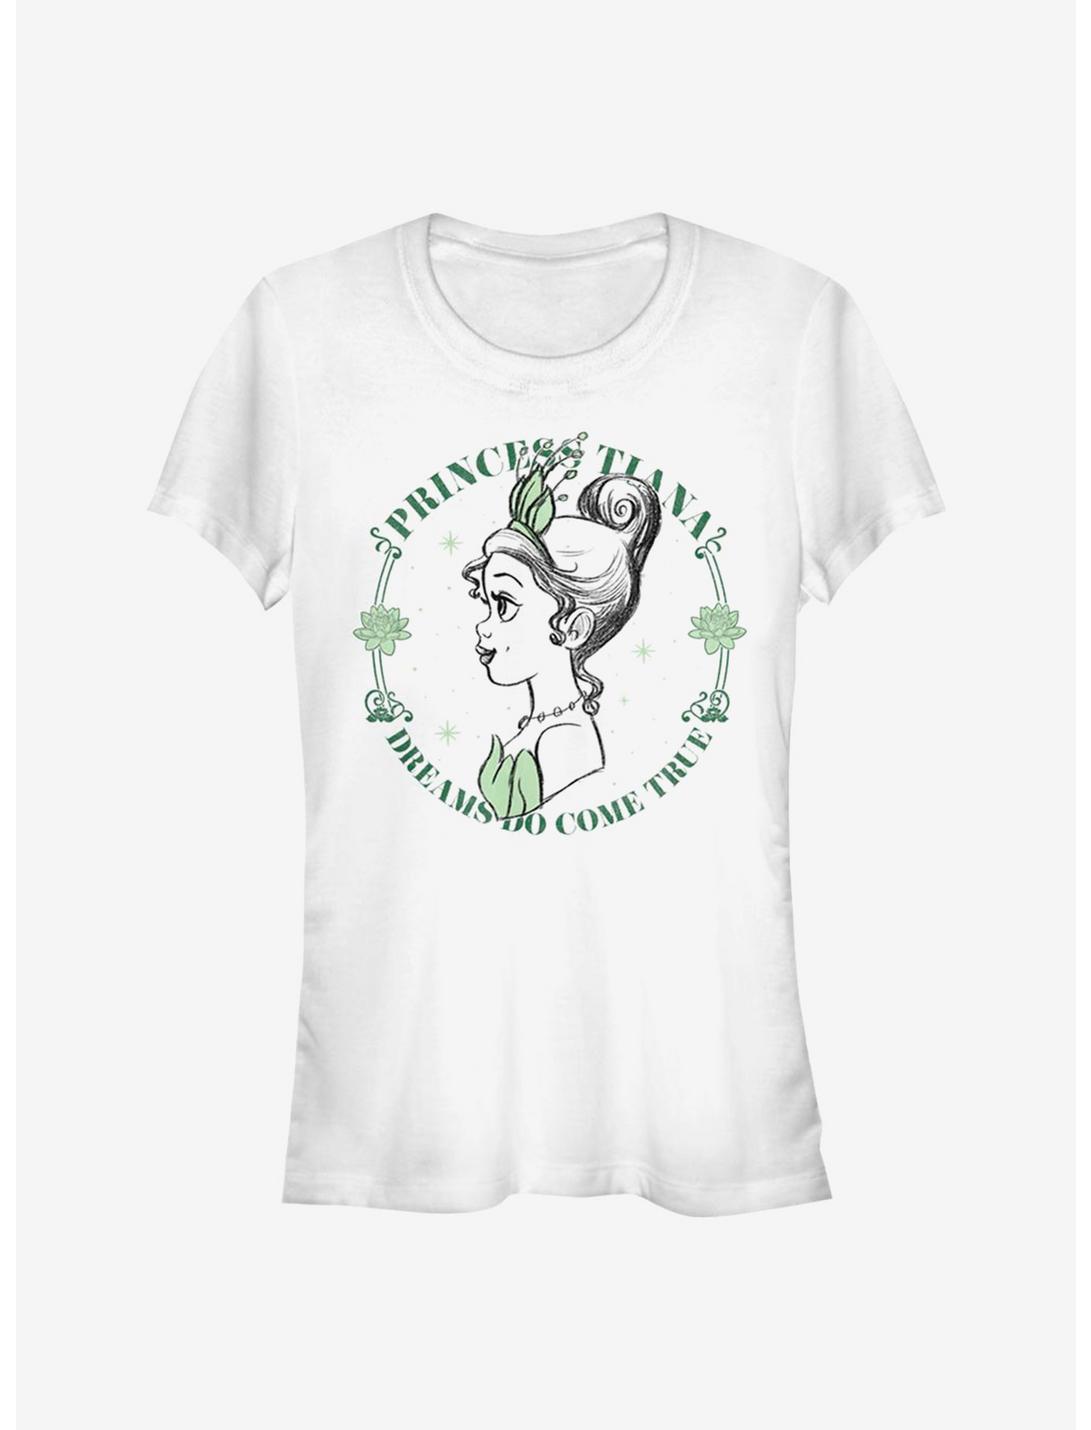 Disney The Princess And The Frog Fairytale Tiana Girls T-Shirt, WHITE, hi-res